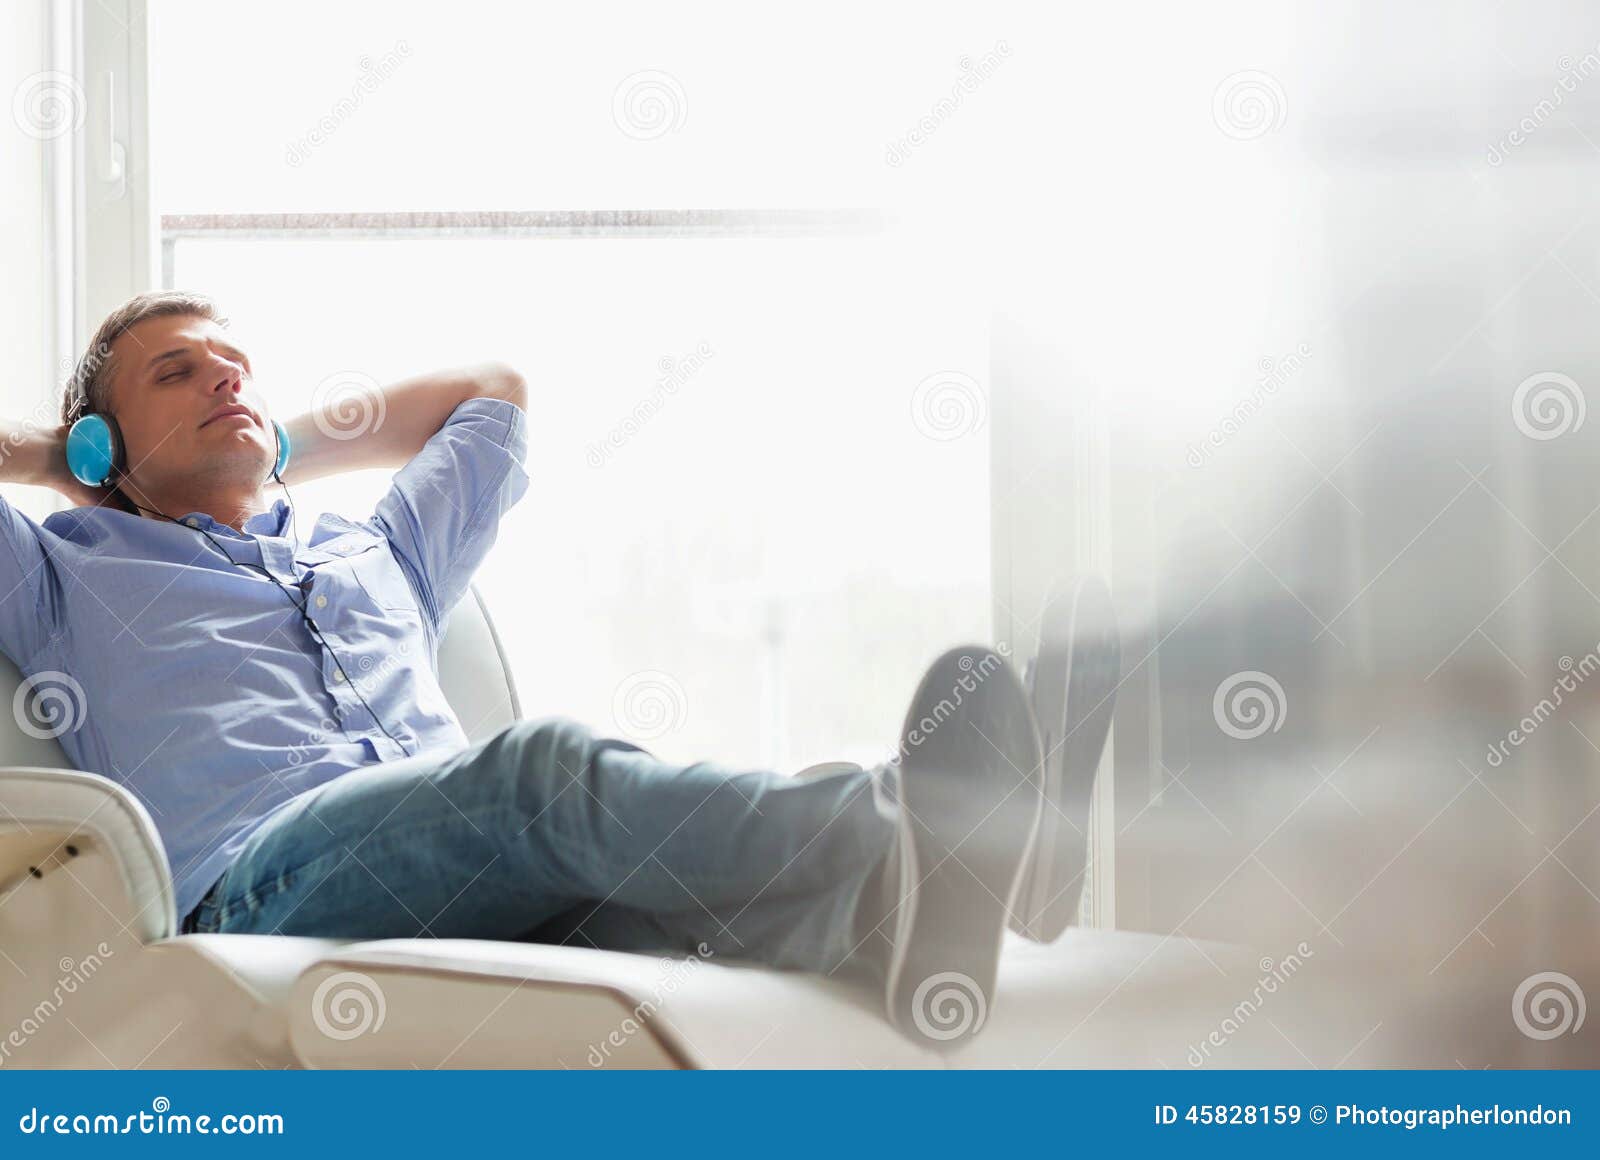 full-length of relaxed middle-aged man listening to music at home